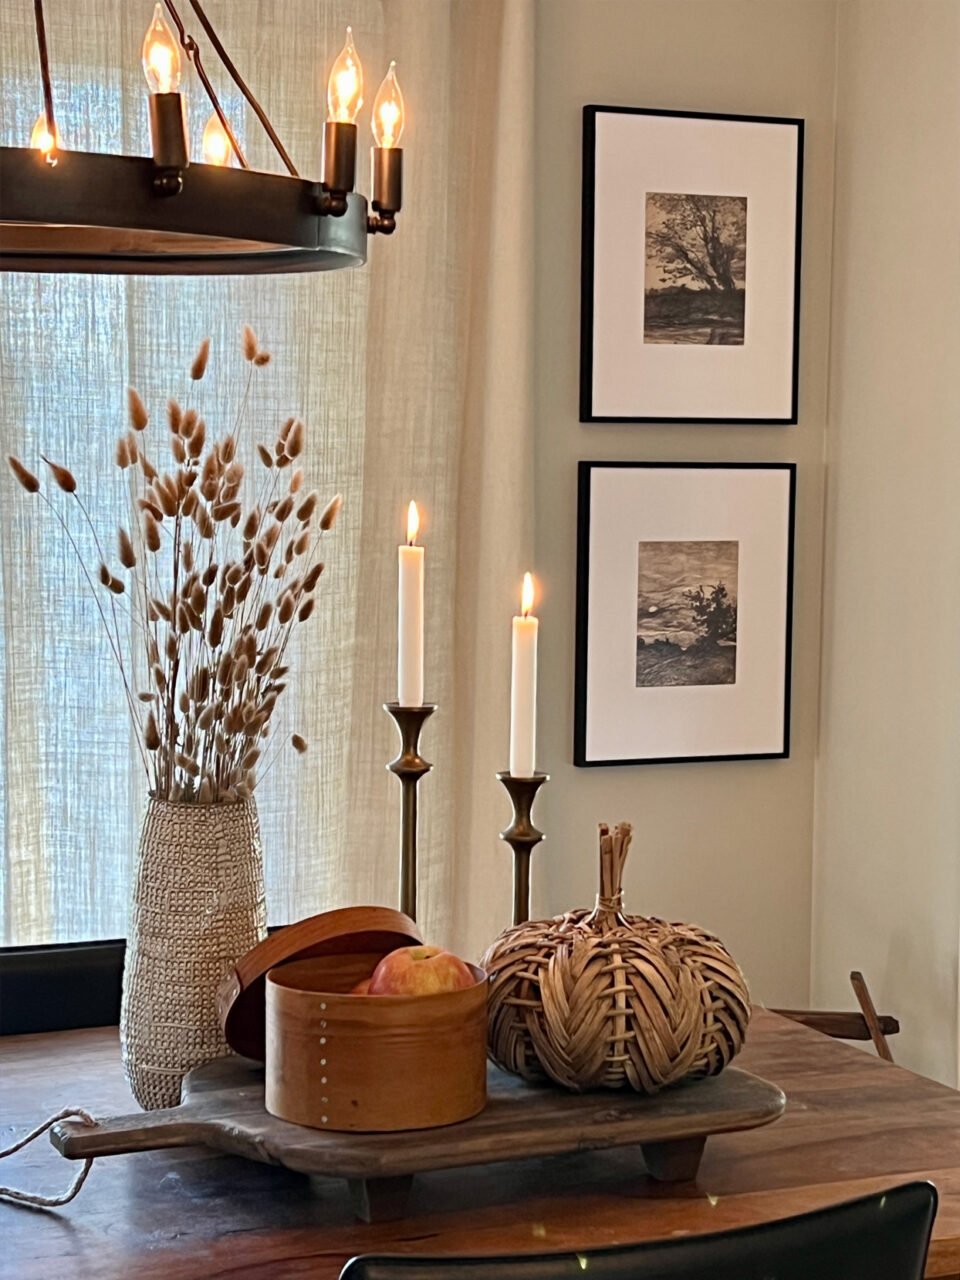 Interior Design AI: A Fall-inspired dining room